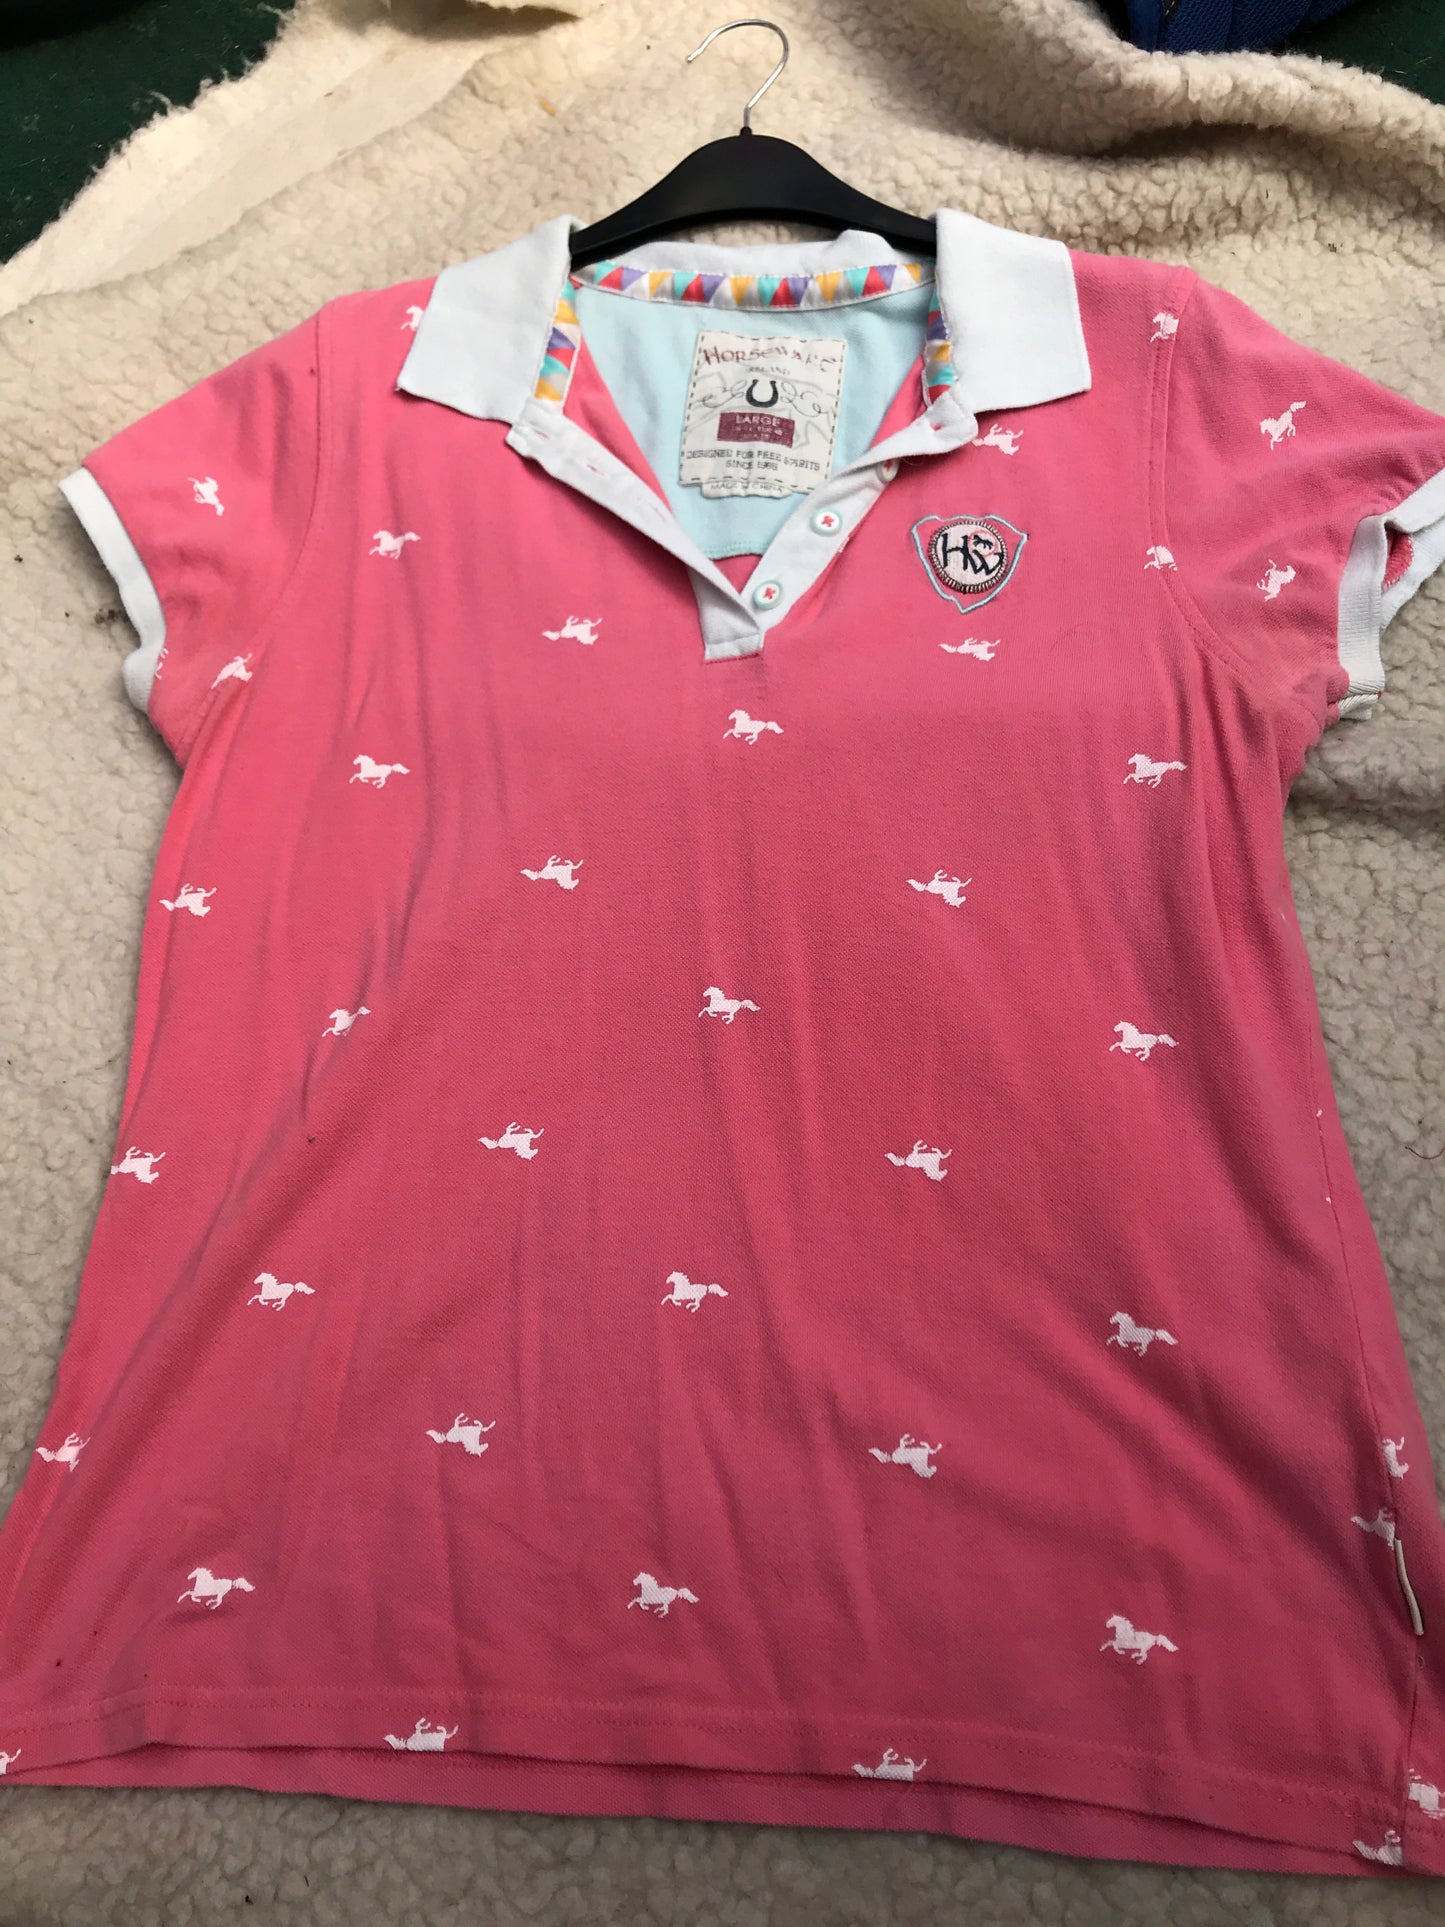 horseware size large pink polo size L FREE POSTAGE